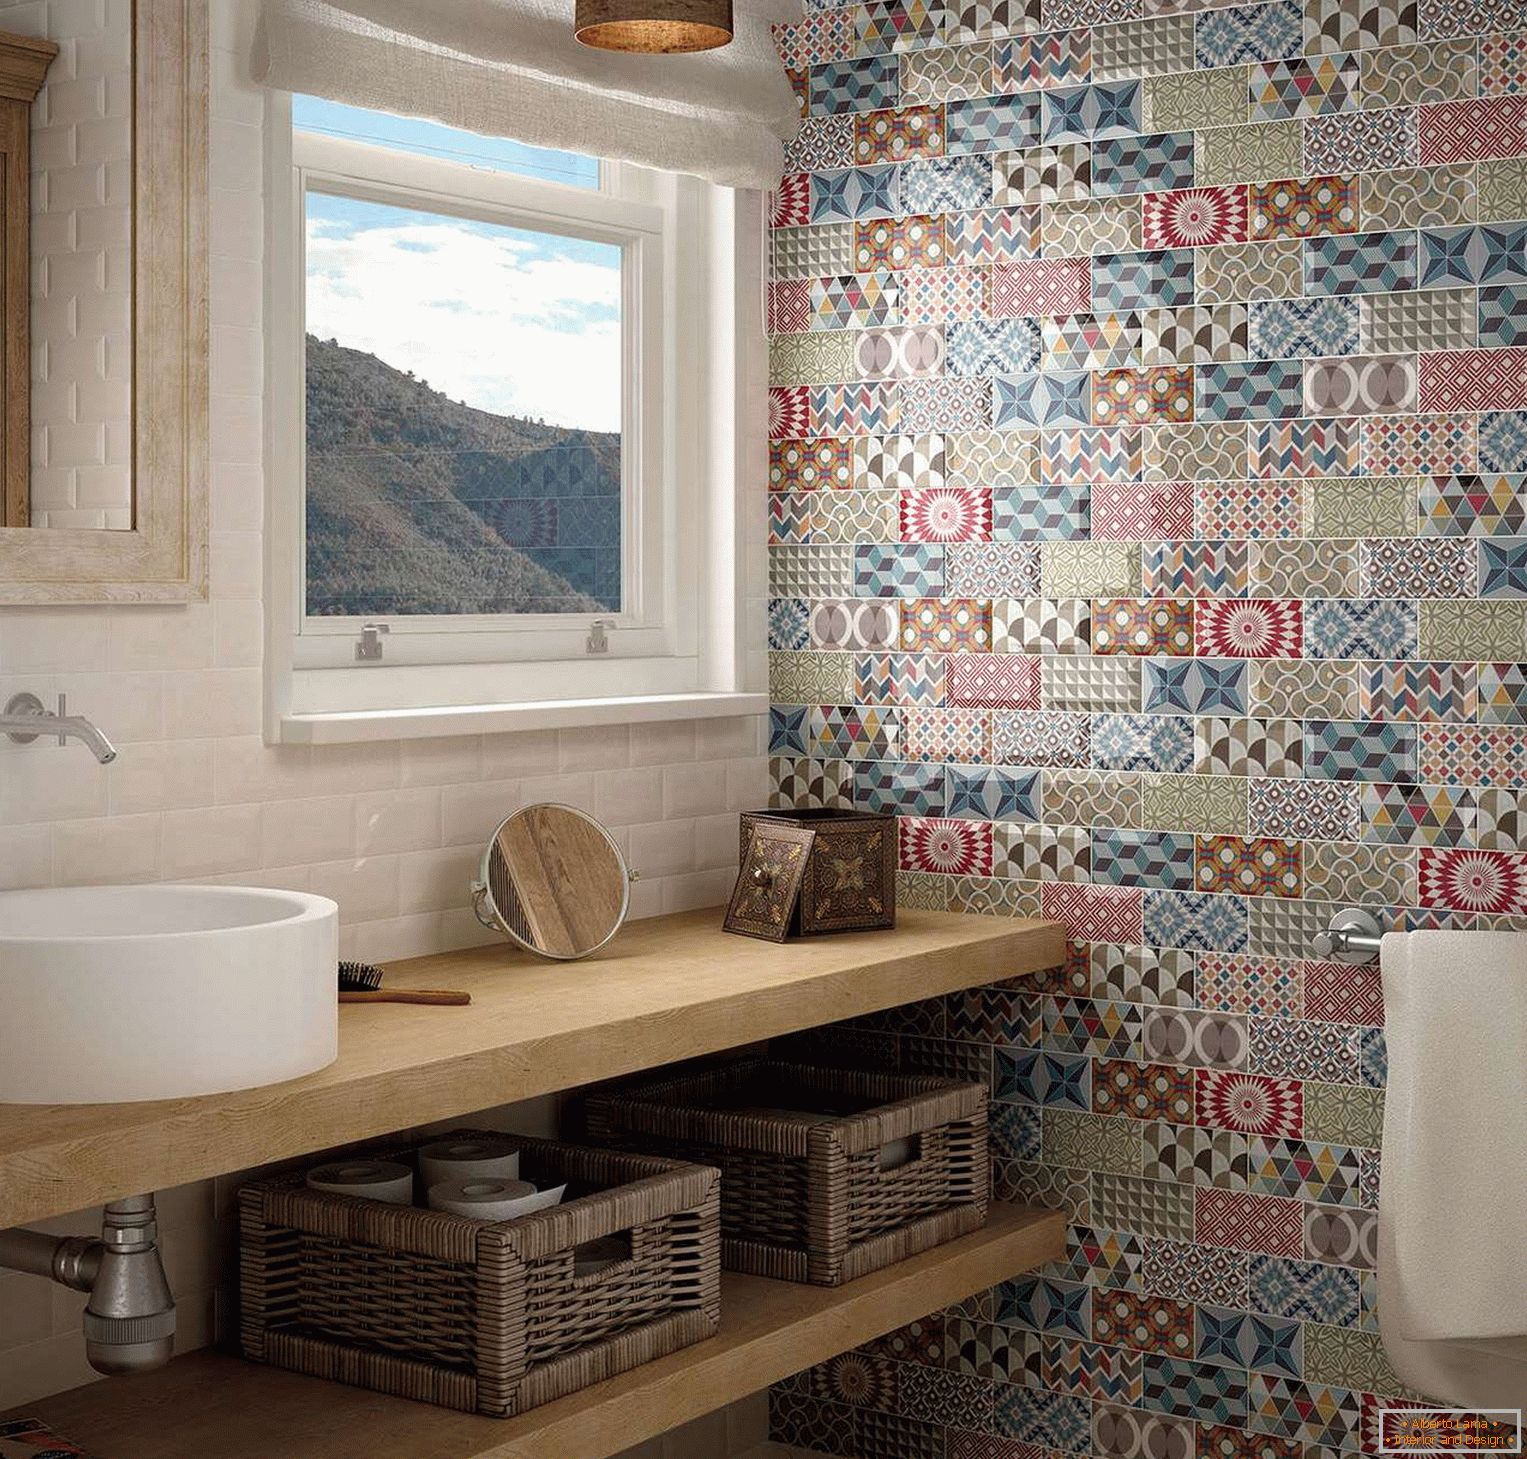 Tile patchwork in the bathroom interior